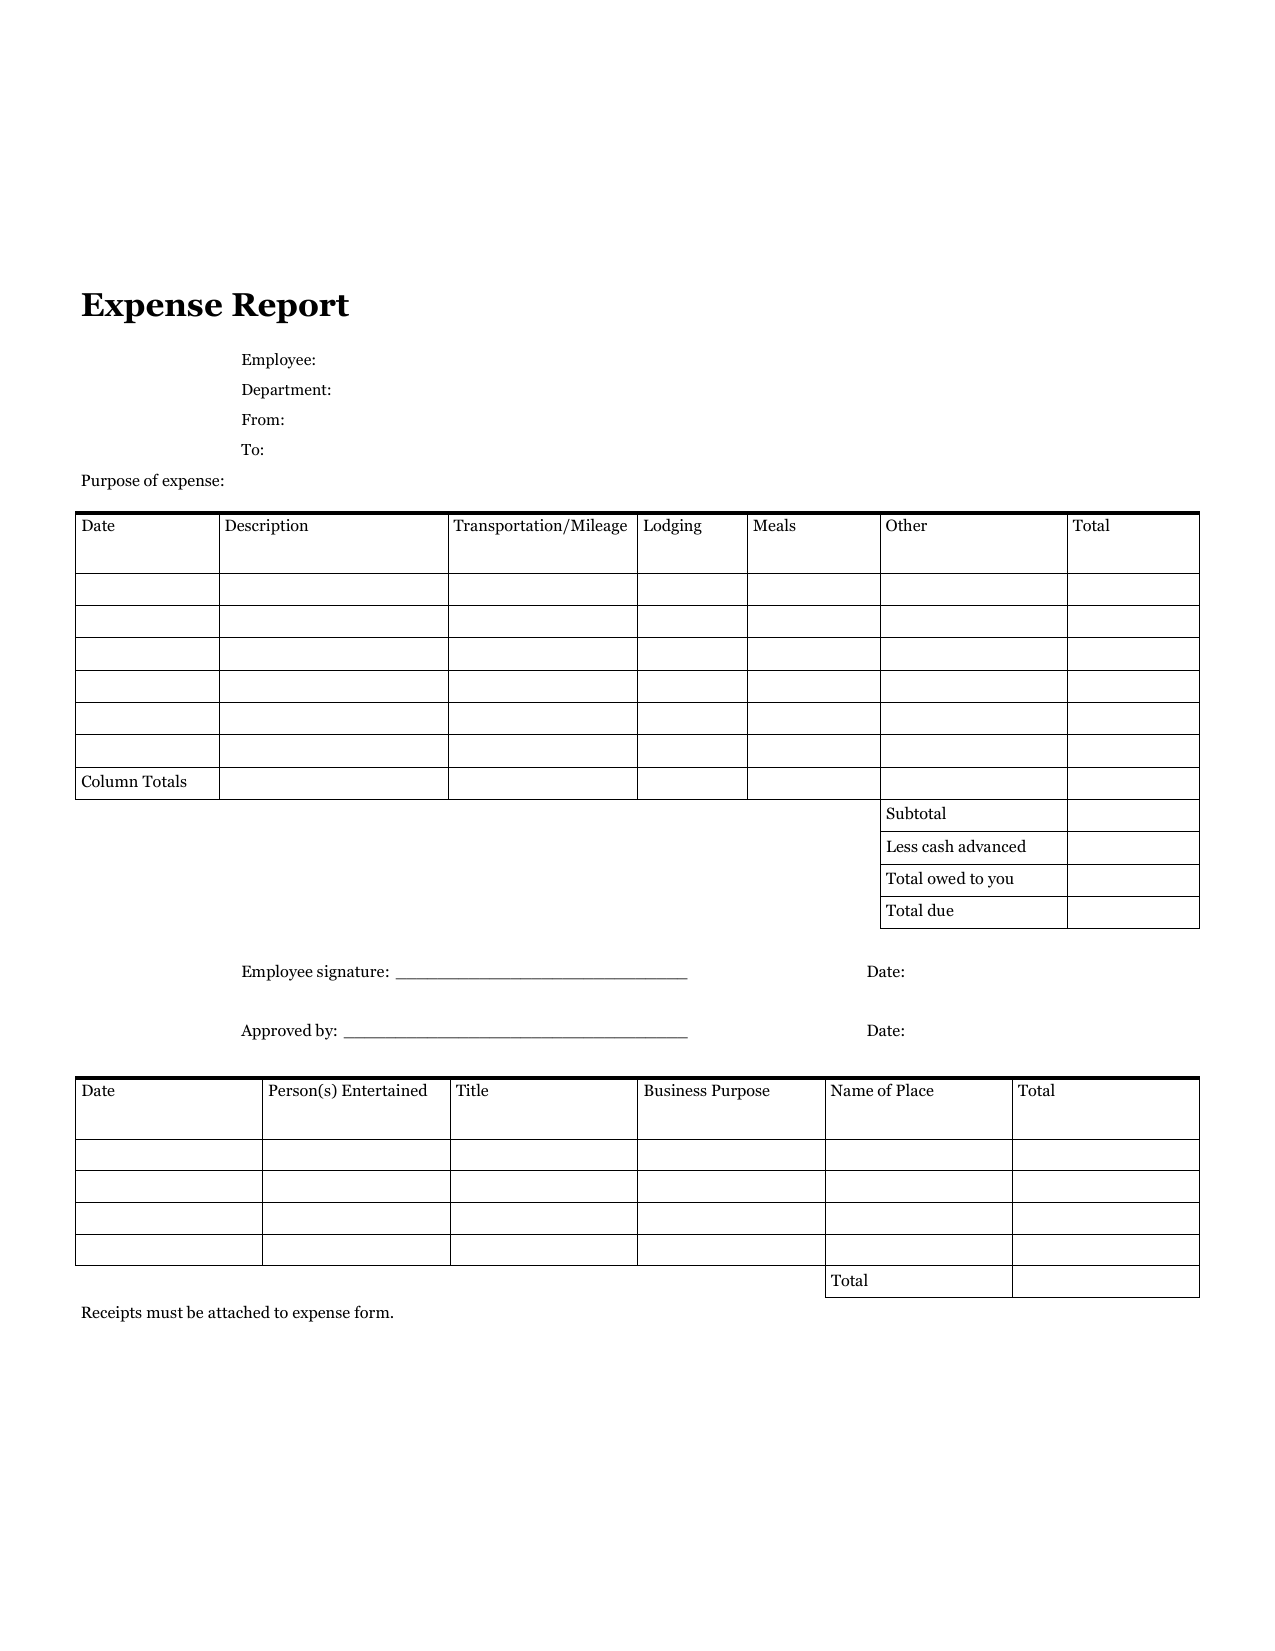 Expense Reports Templates